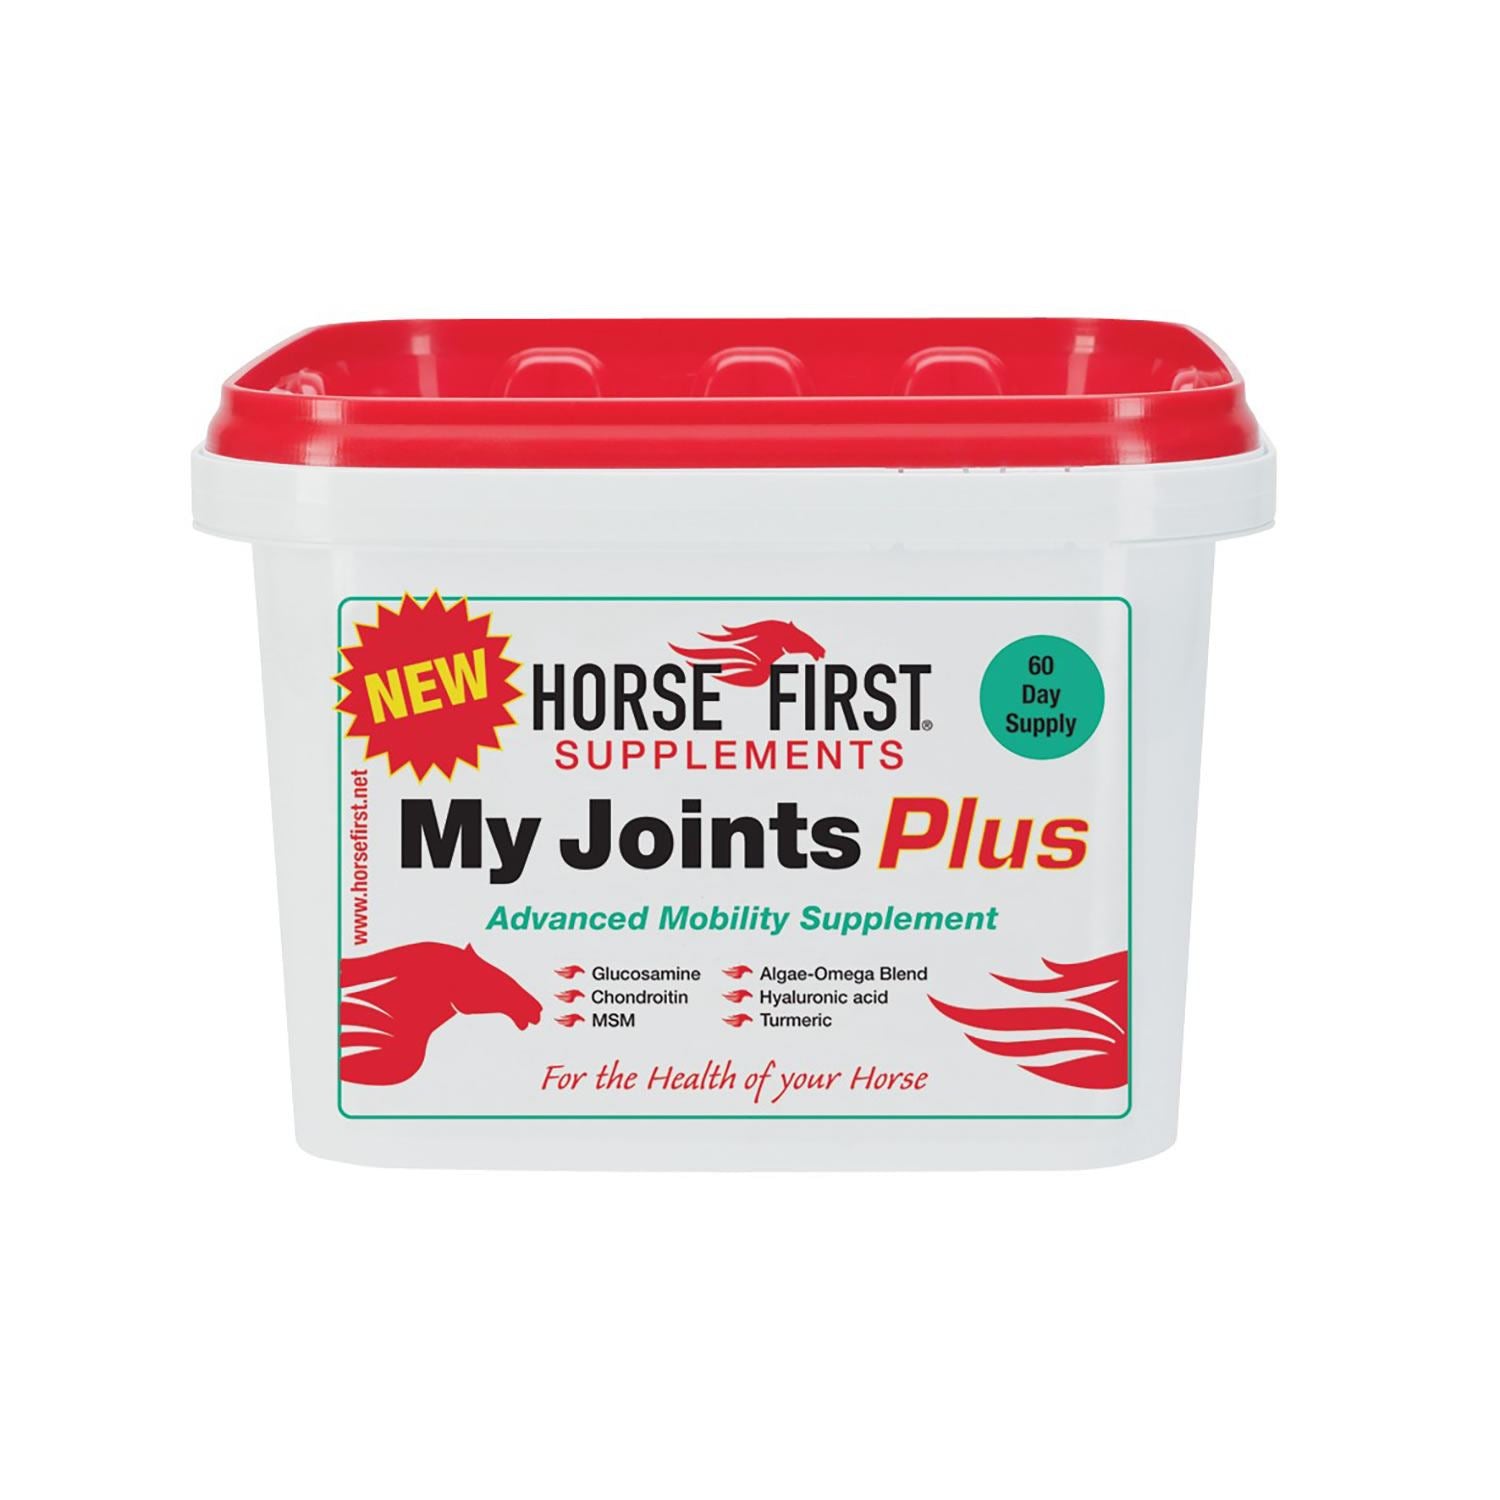 Horse First My Joints Plus offers a unique blend of premium nutrients for joint health